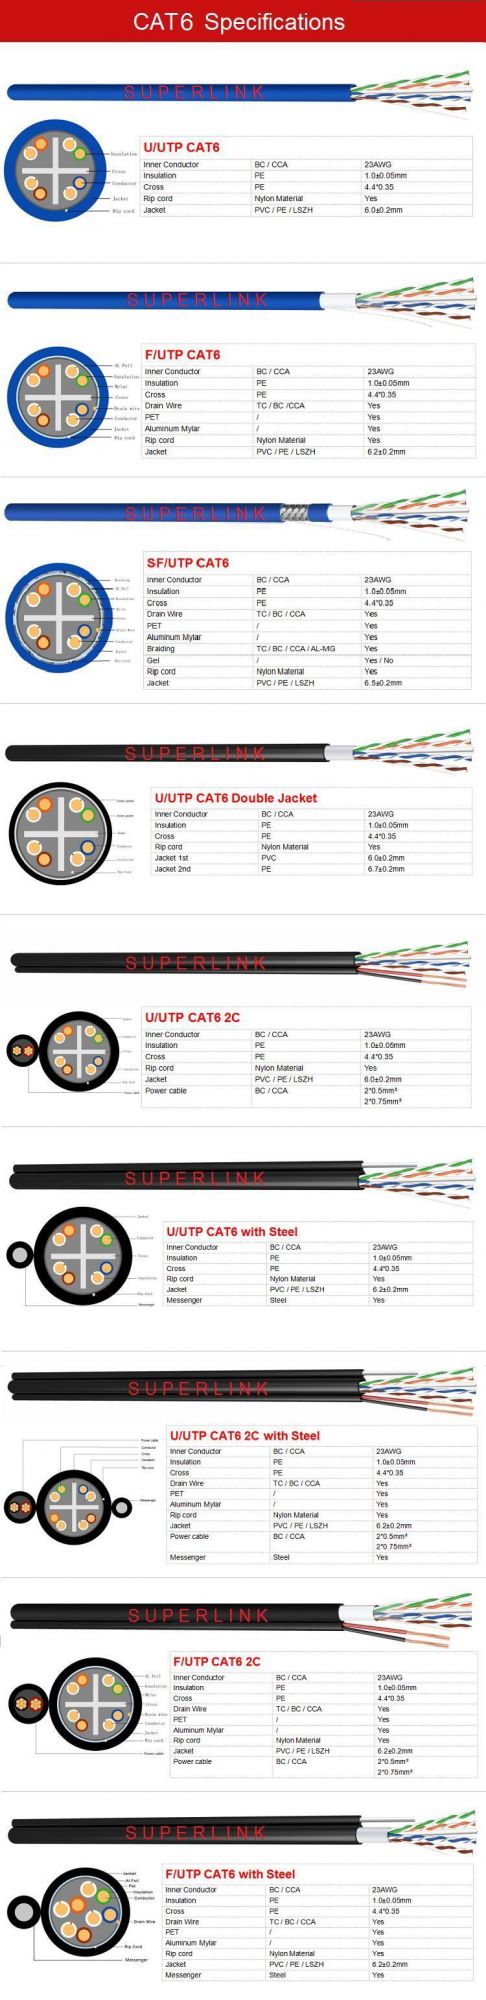 Cable Cat 6 350 MHz LAN Cable Solid Copper Cable 23AWG UTP CAT6